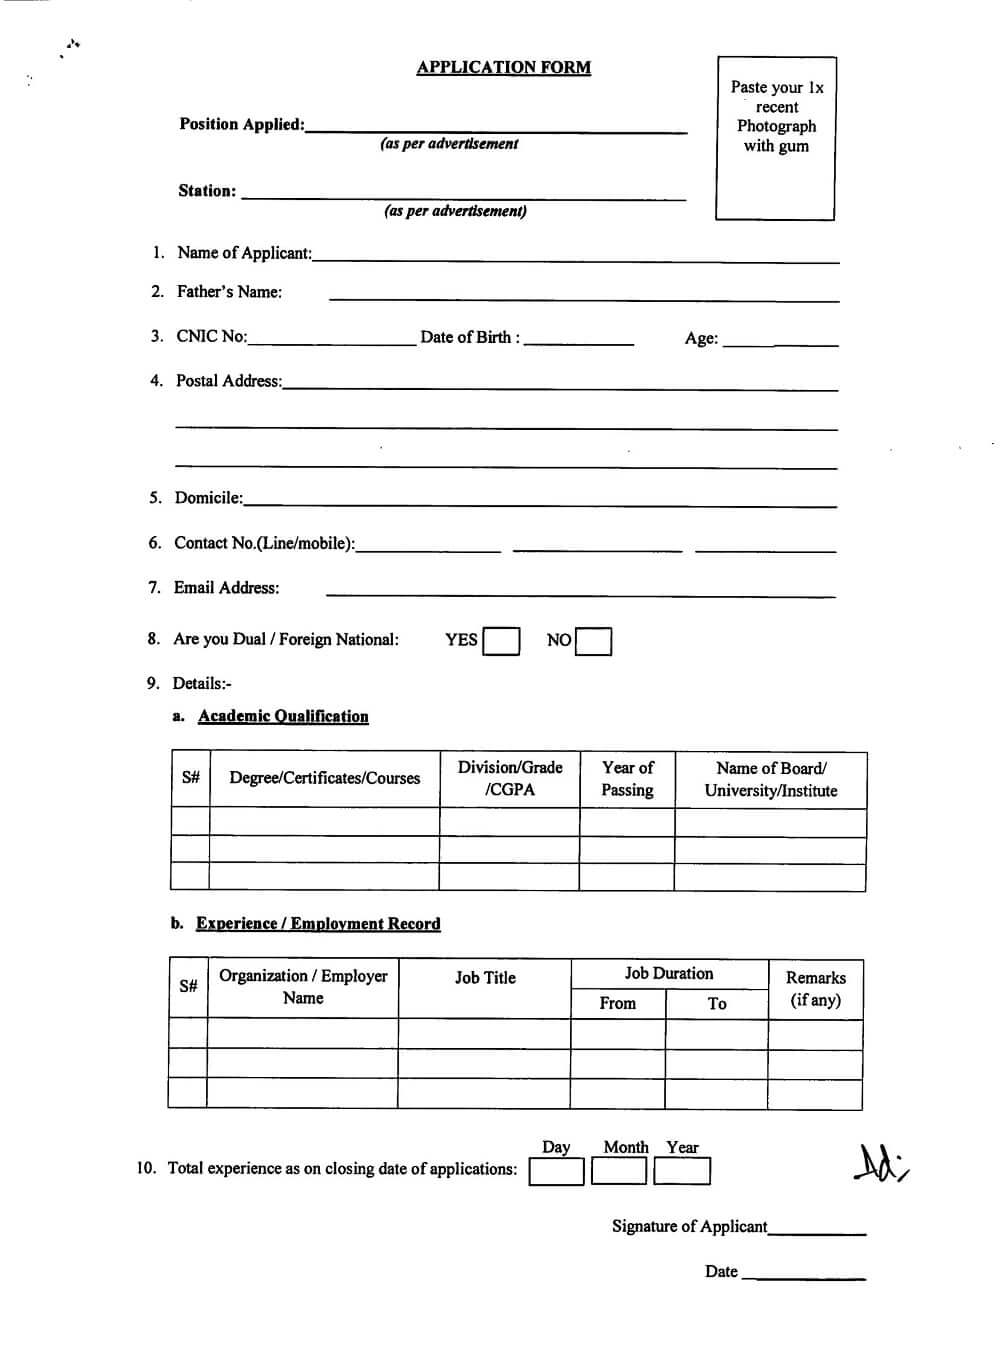 Download the NAB Application Form